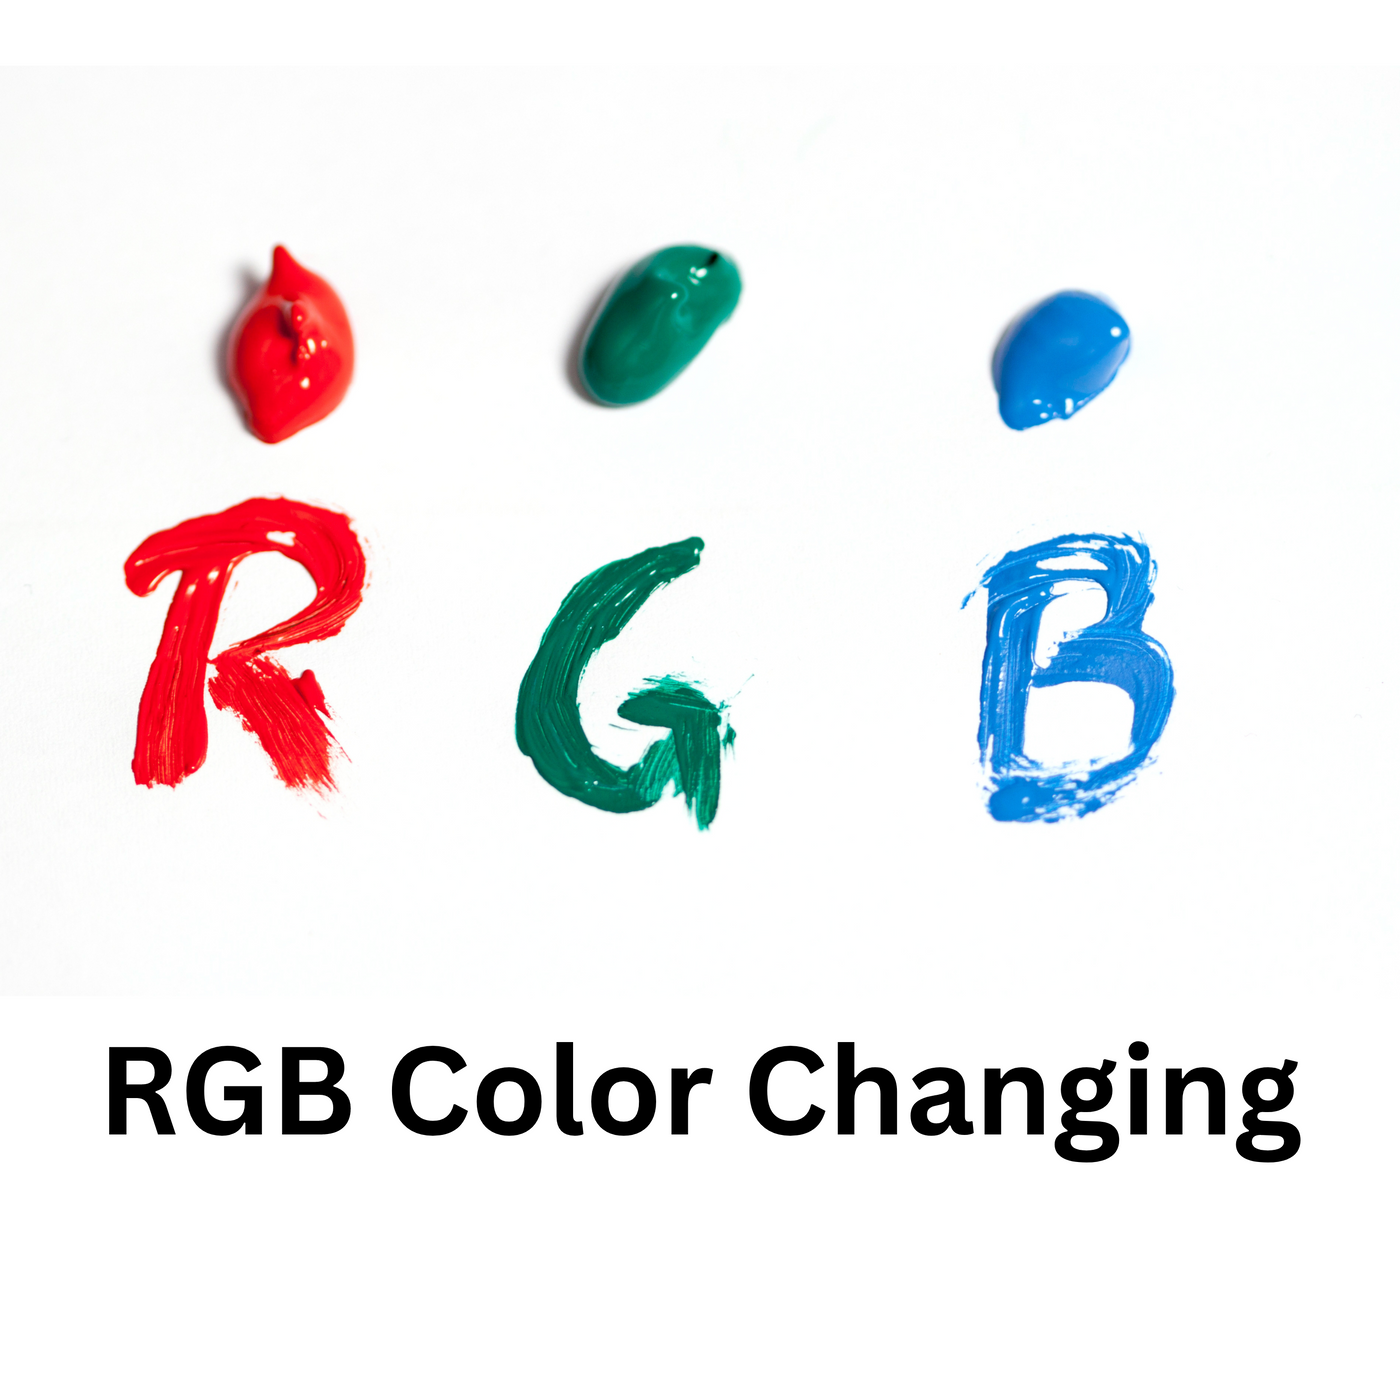 Extra Fee For RGB Color Changing Option (For 1 sign)